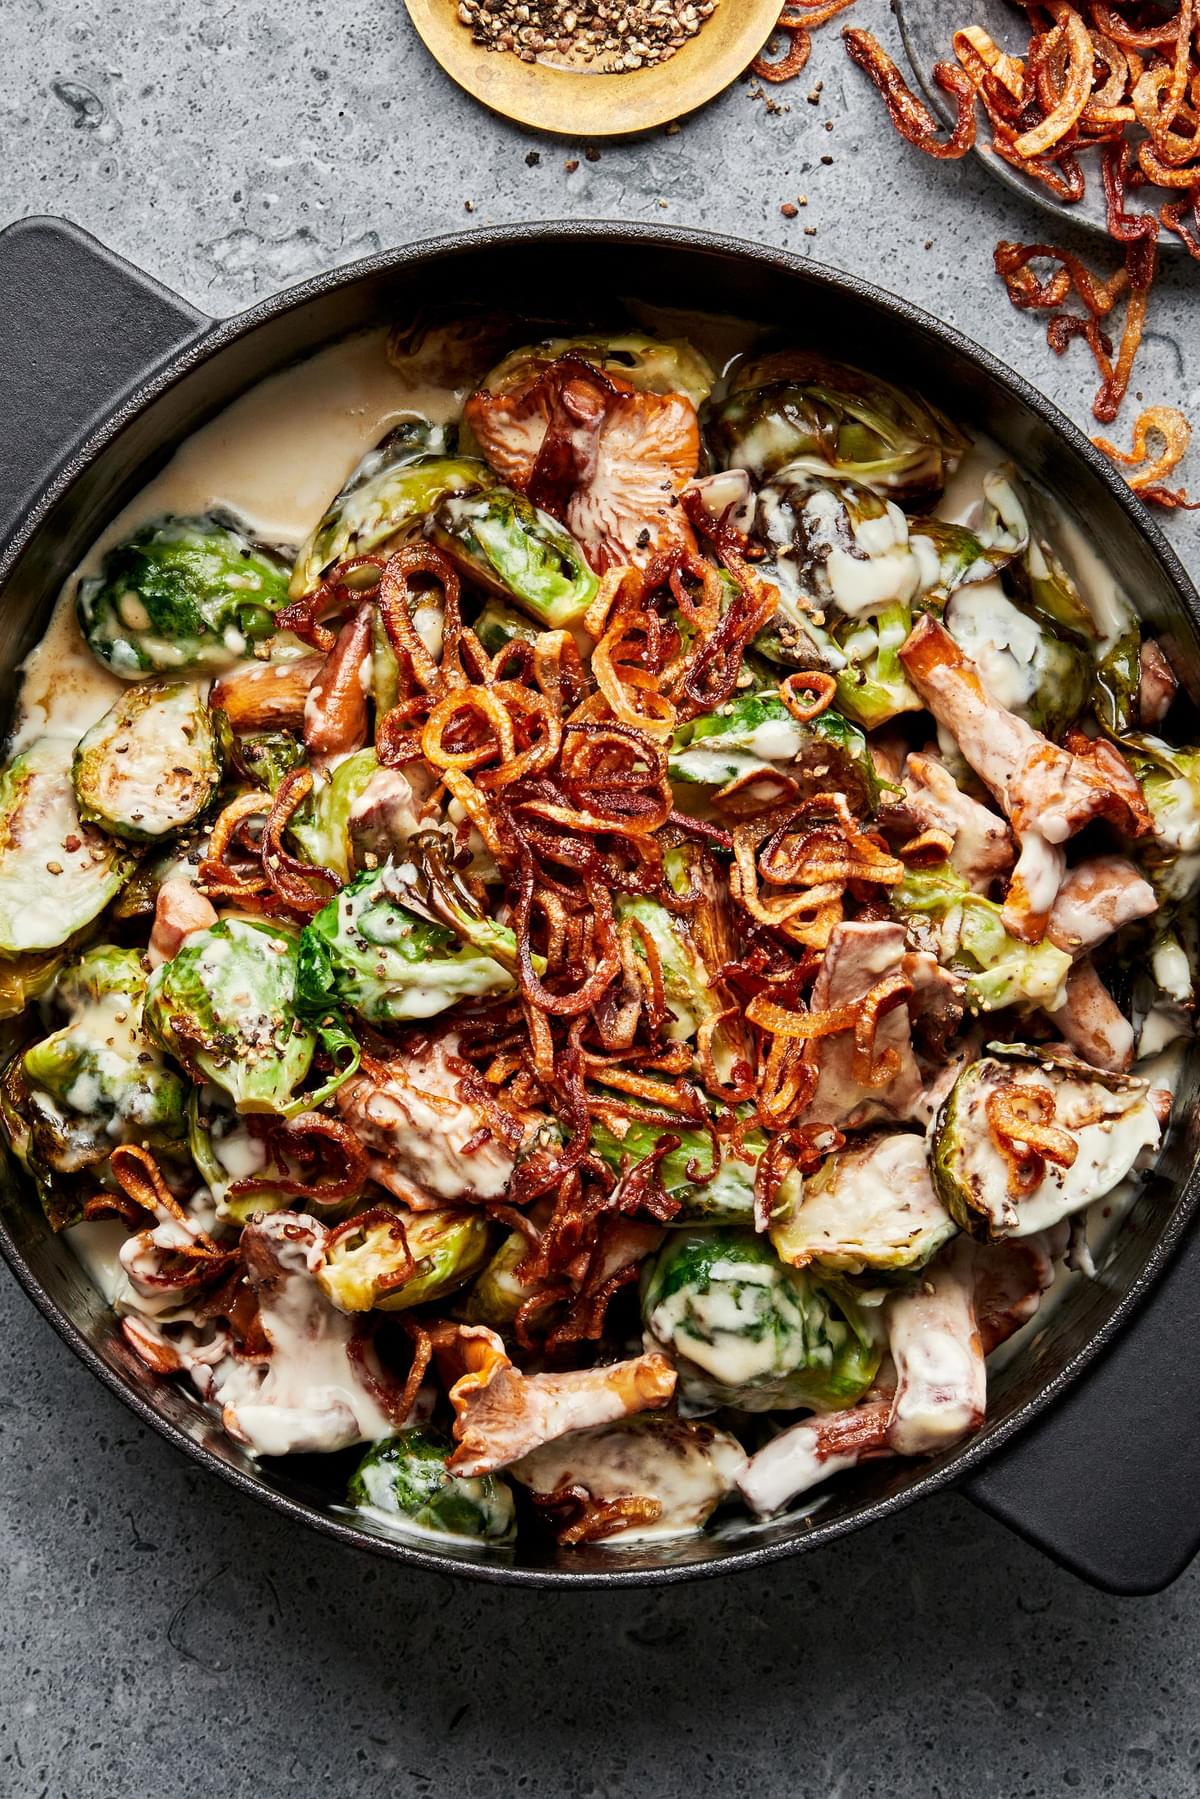 creamy brussels sprouts with wild mushrooms topped with fried shallots in a skillet